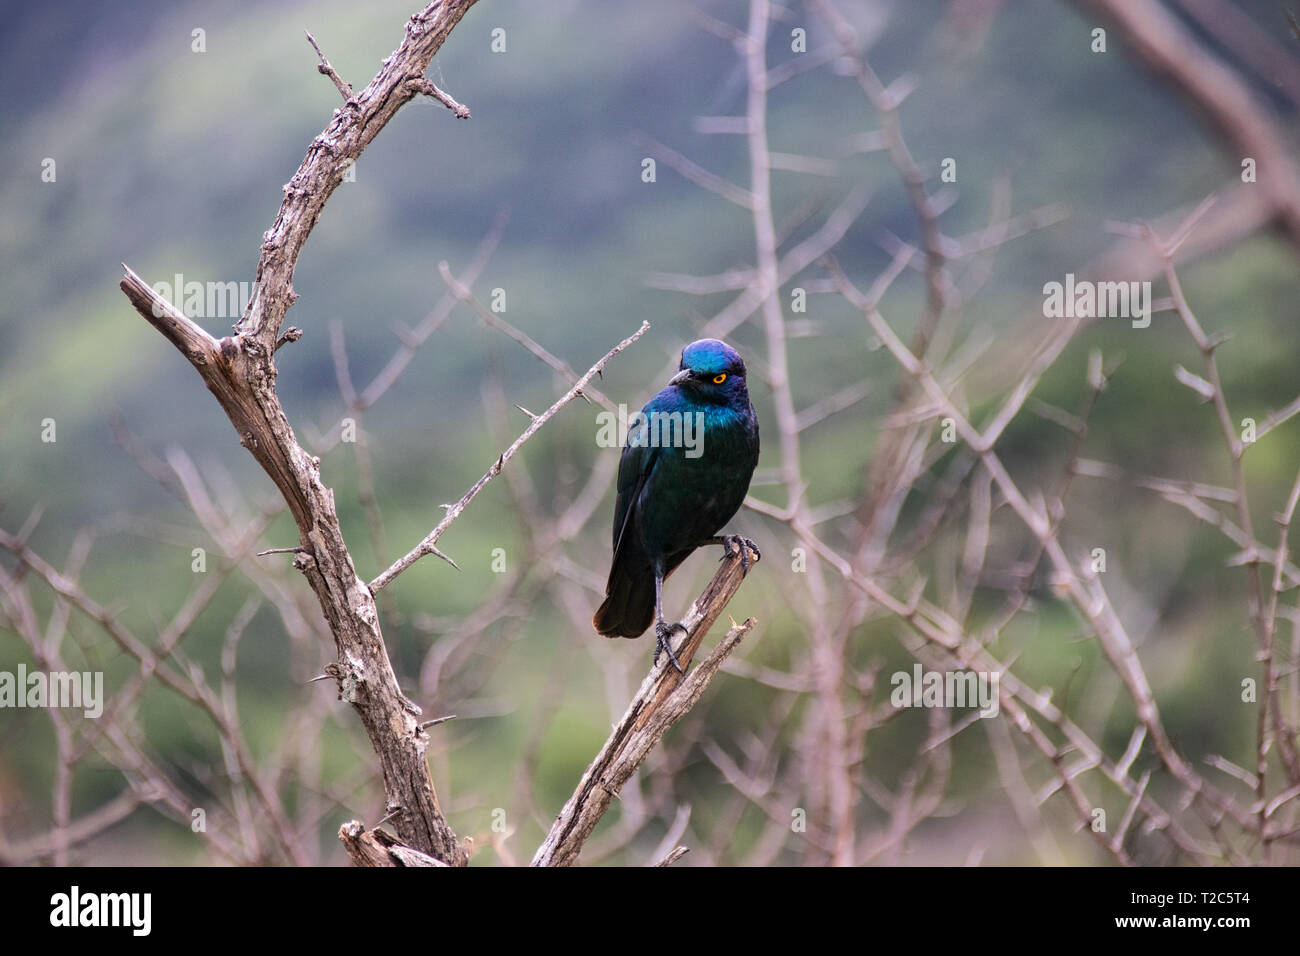 Cape glossy starling (Lamprotornis nitens) blue bird with yellow eye perched in bush with bright green background Stock Photo